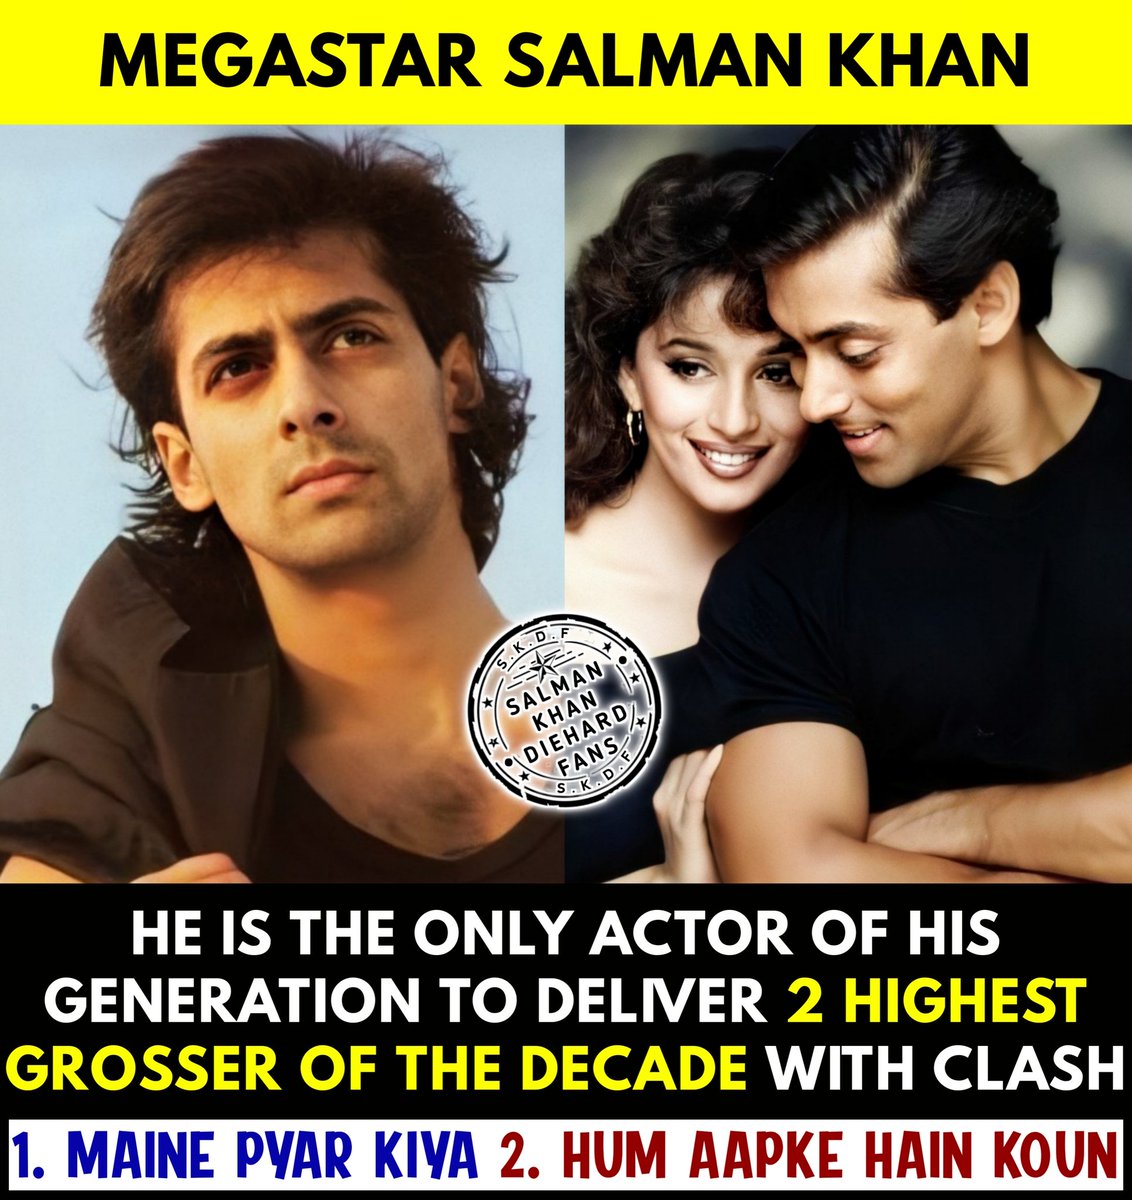 Megastar #SalmanKhan , , , , He Is The Only Actor Of His Generation To Deliver 2 Highest Grosser Of The Decade With Clash . . . .
1. #MainePyarKiya 2. #HumAapkeHainKoun